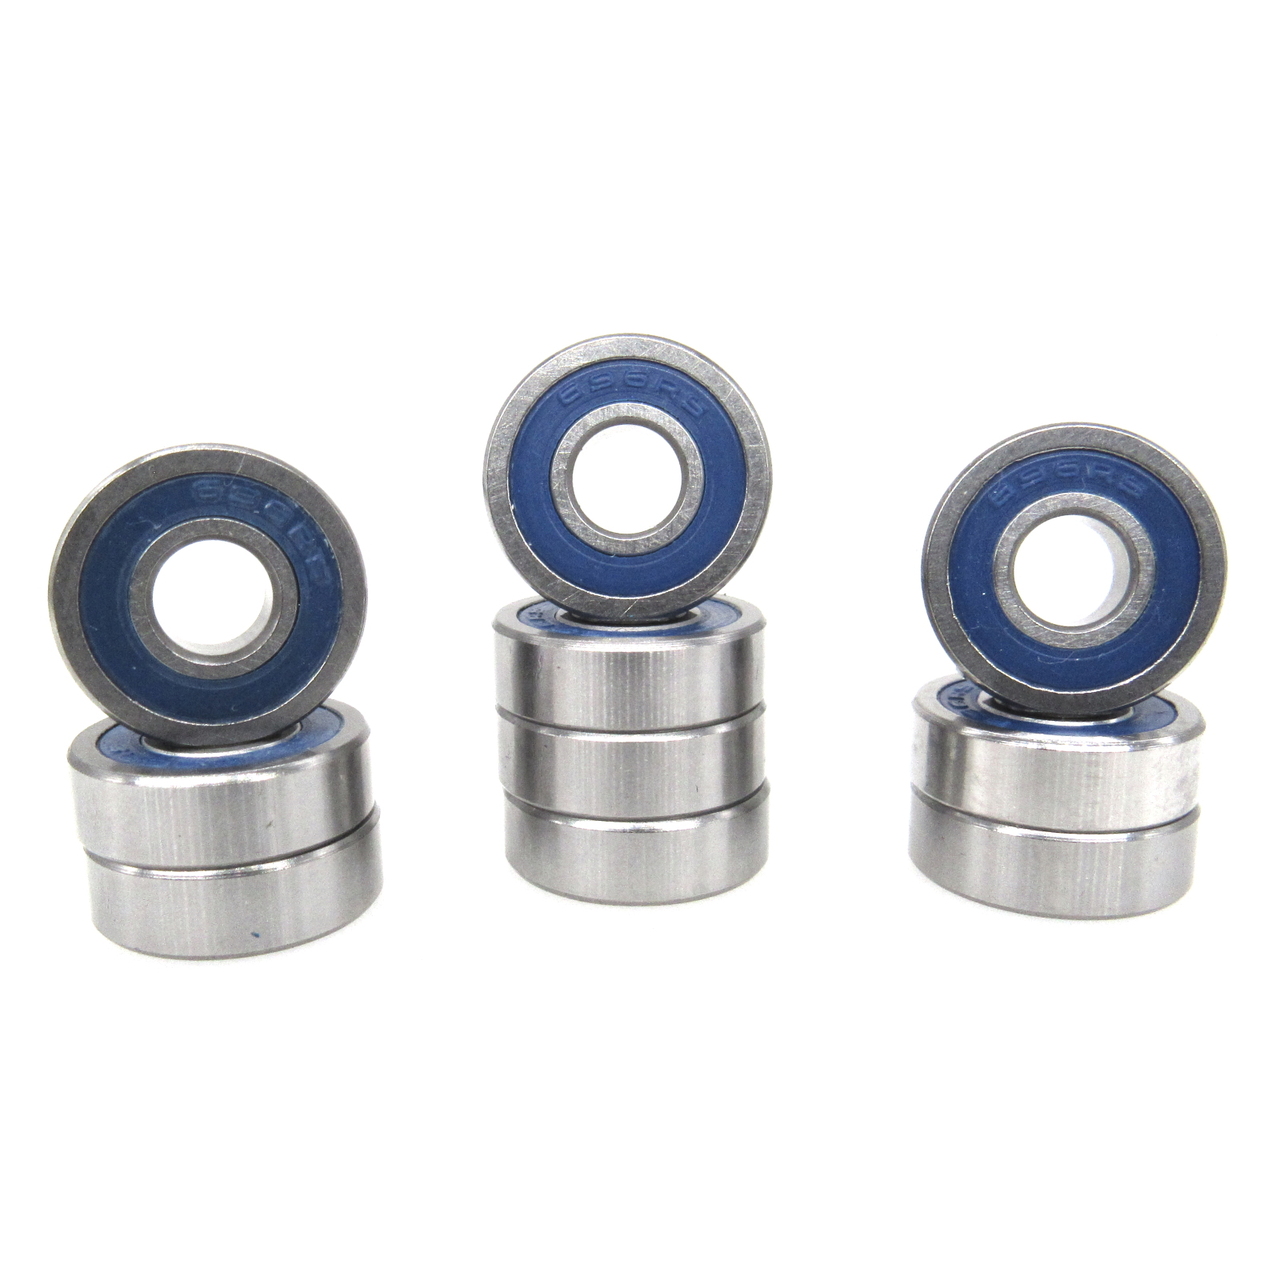 696A-2RS 6x16x5mm Precision High Speed RC Car Ball Bearing, Chrome Steel (GCr15) with Blue Rubber Seals ABEC-1 ABEC-3 ABEC-5